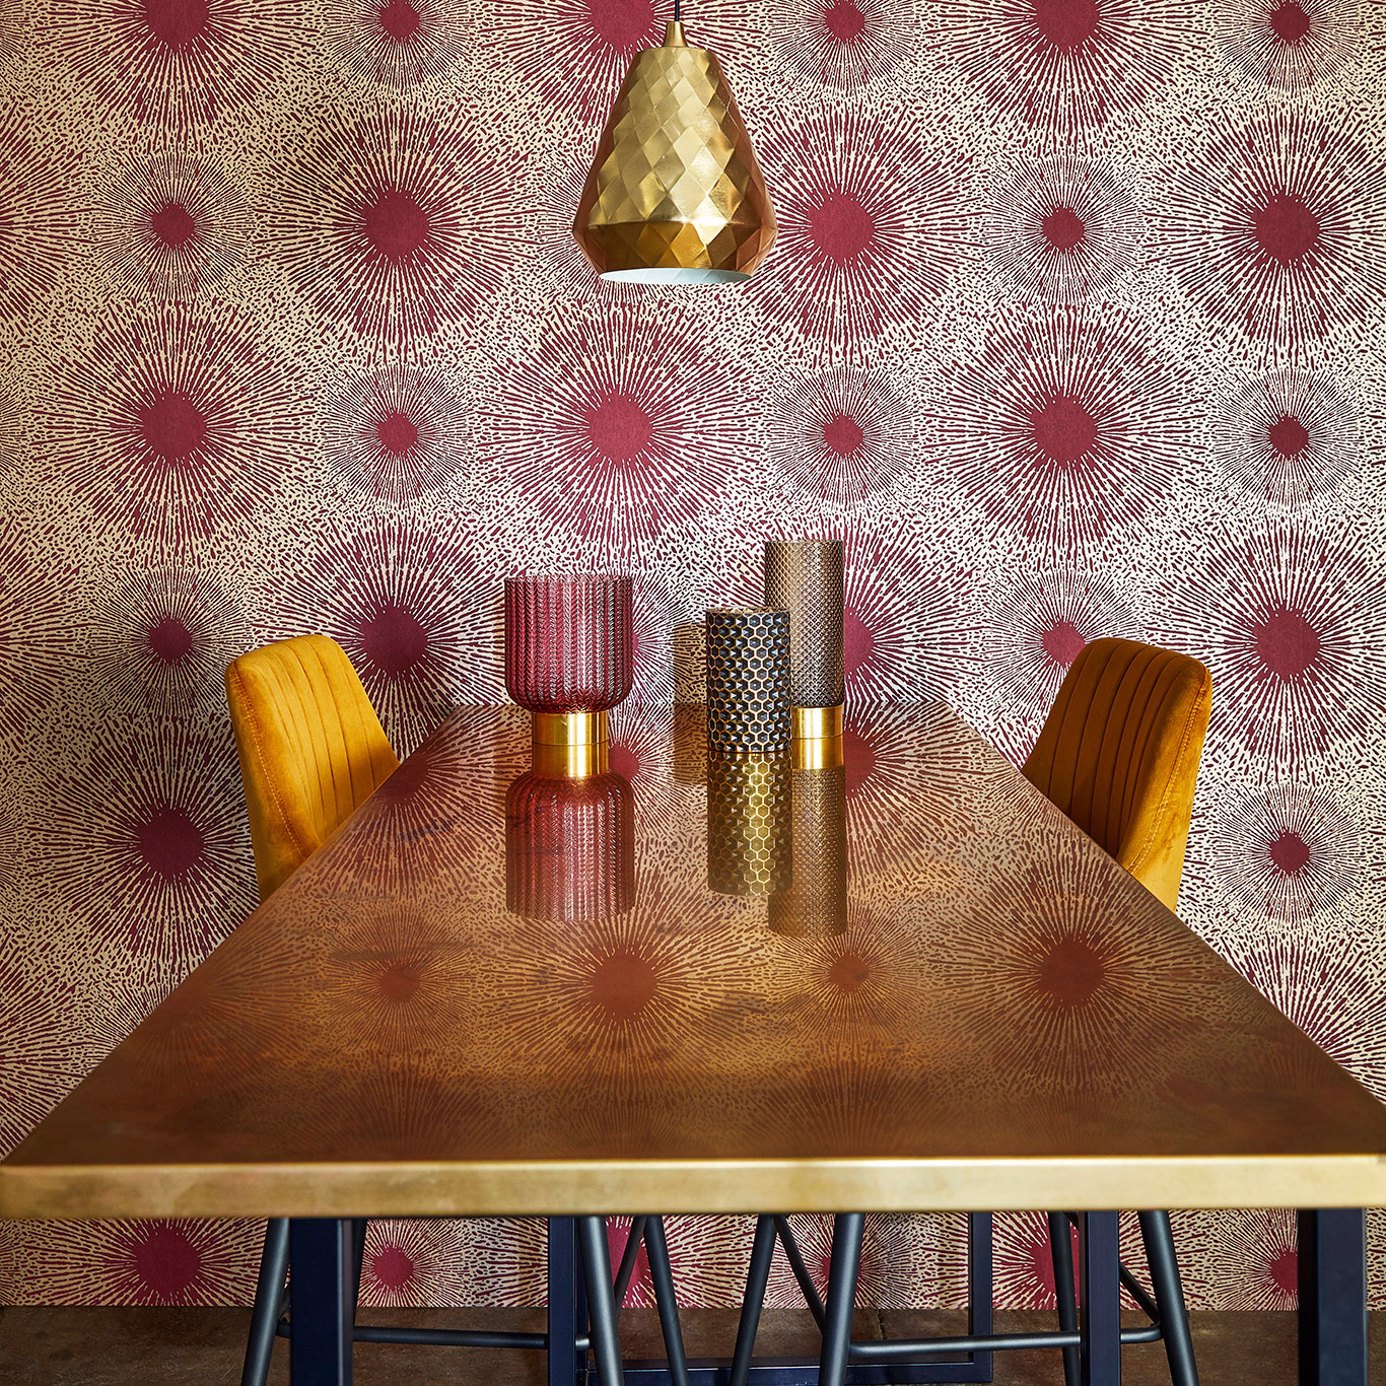 Anthology Perlite Ruby / Antique Brass Wallpaper by HAR